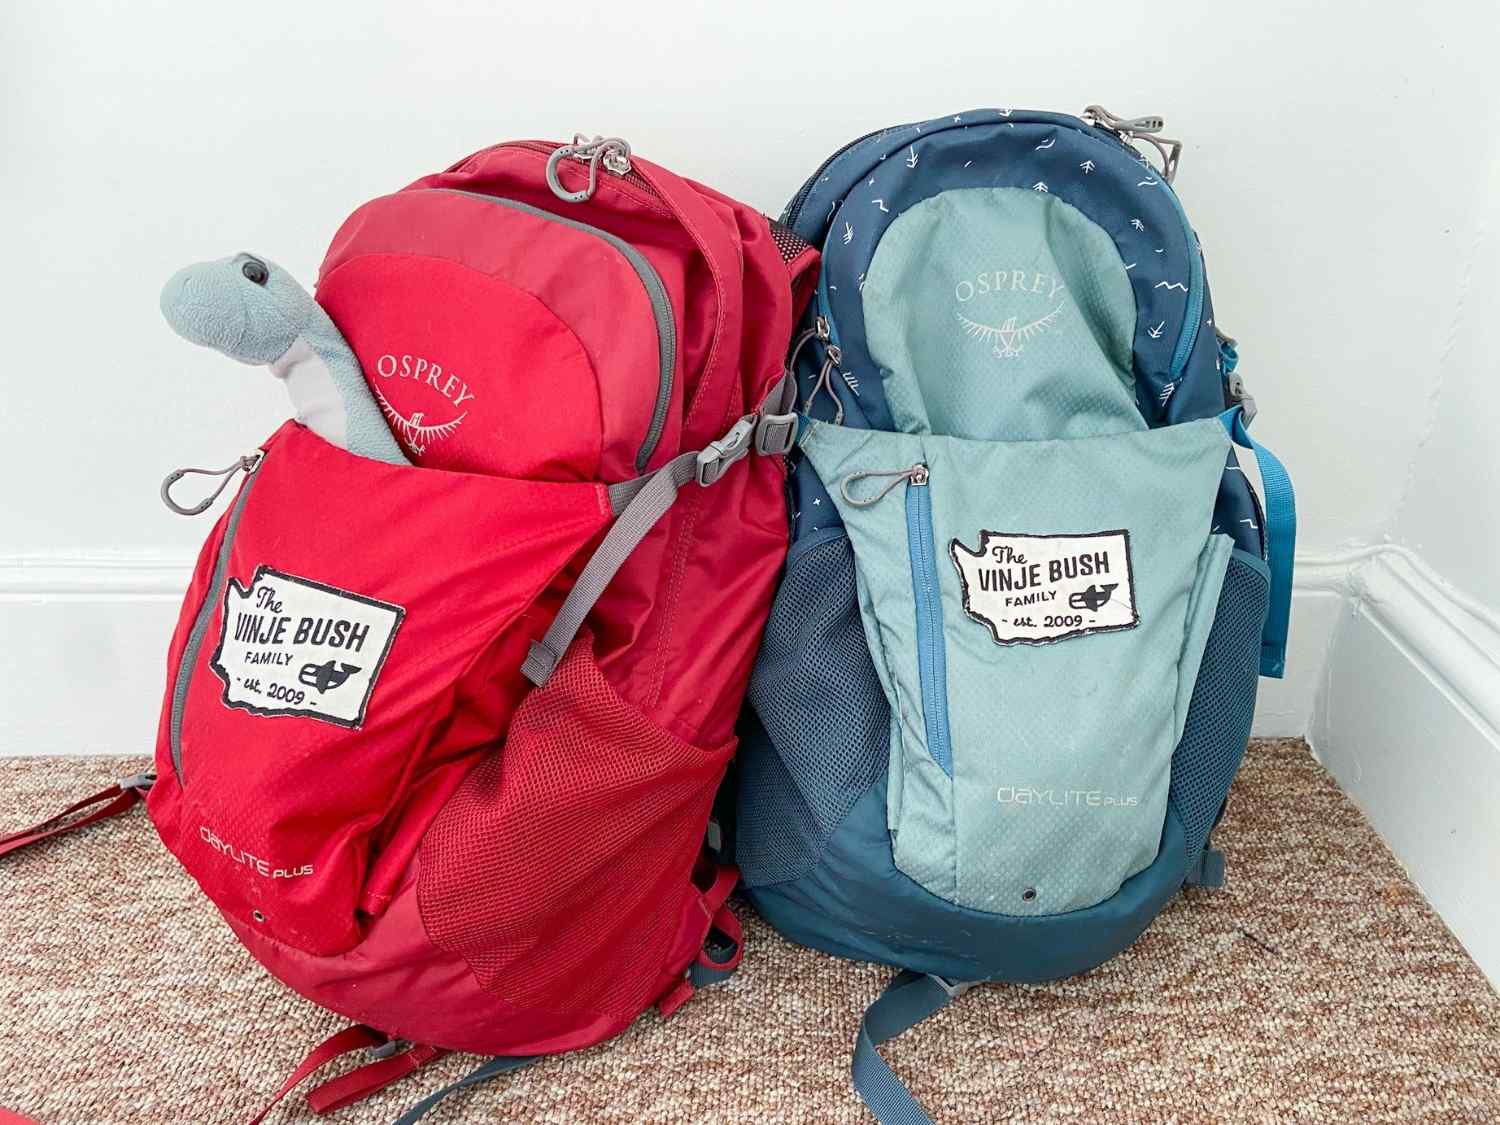 Voorzitter Onderbreking Lui The Best Backpack for Travel With Kids: 9 Backpacks To Buy For Families -  The Wandering Daughter - Family Travel